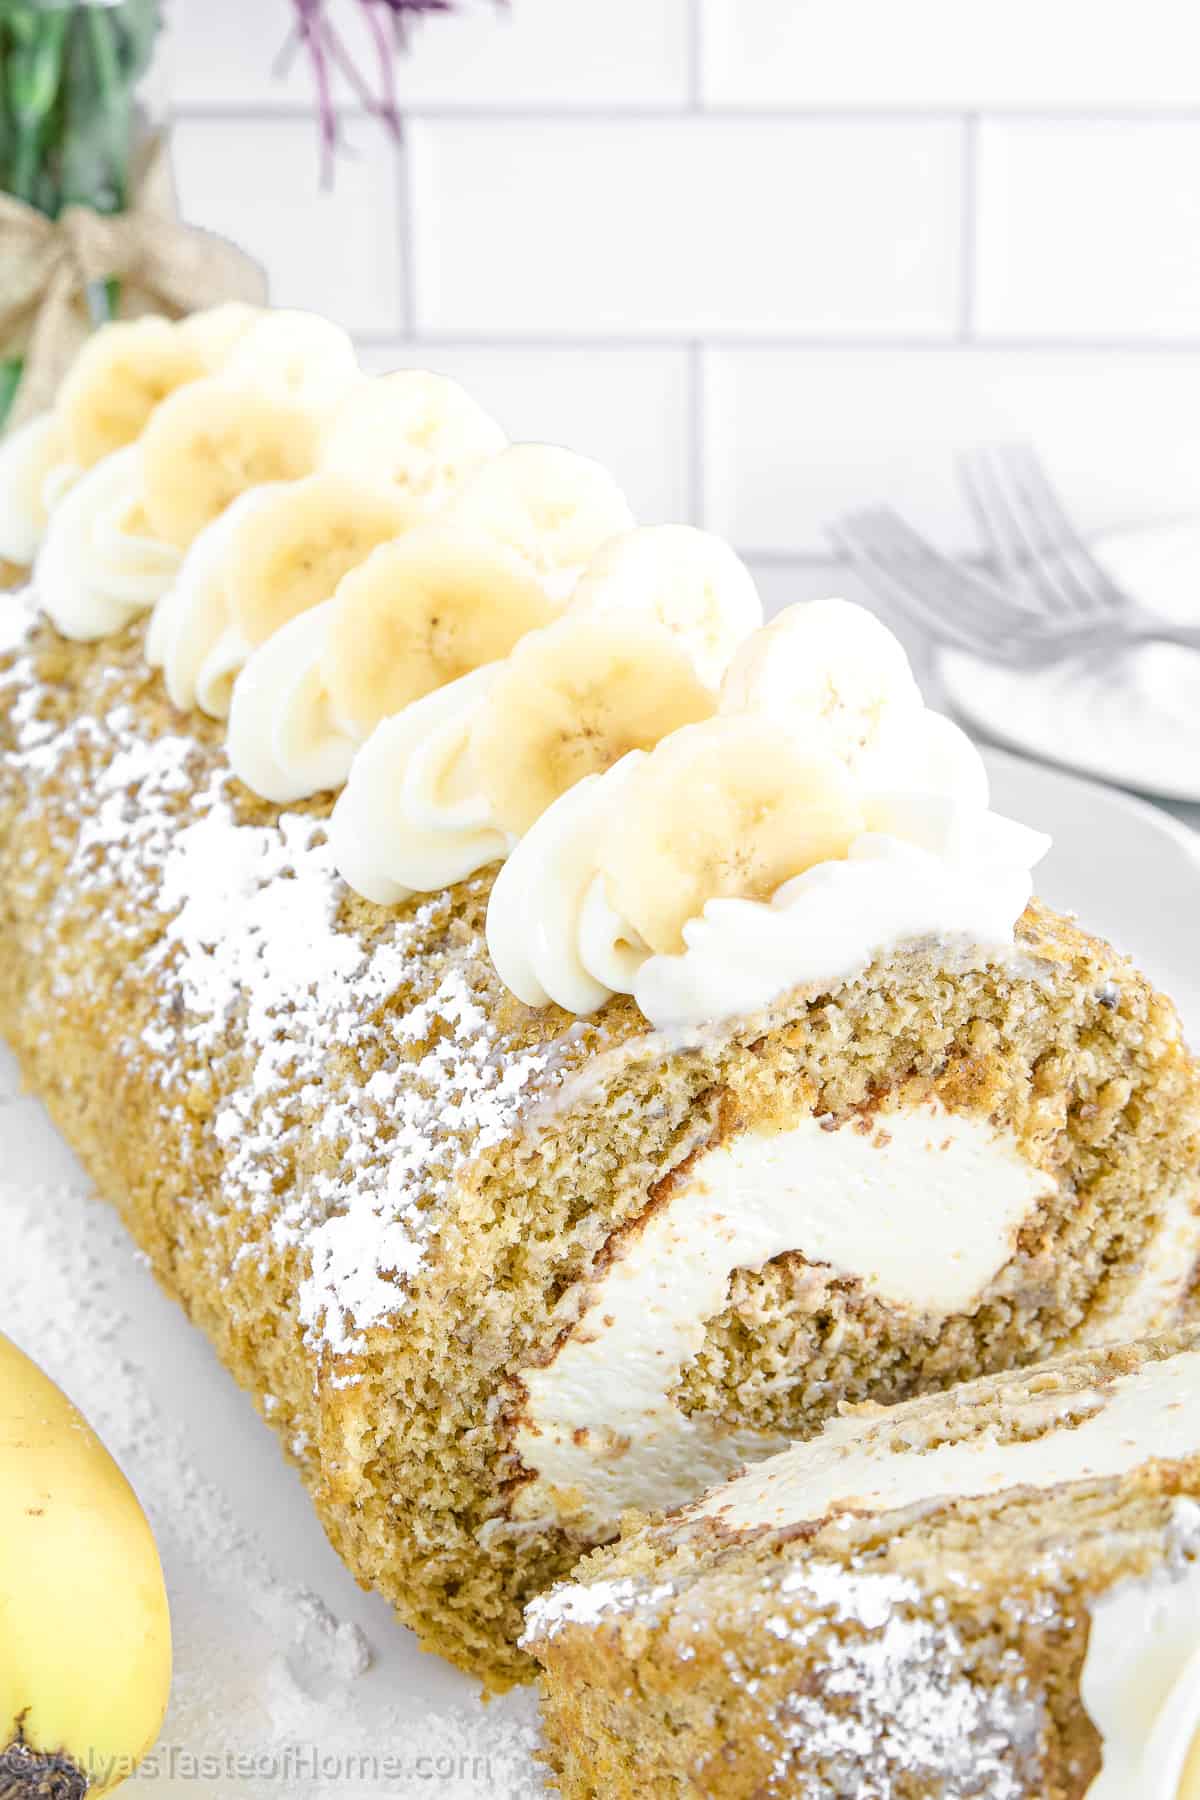 This Banana Roll recipe features a fluffy and moist banana sponge cake filled with creamy and rich cream cheese frosting. It's then rolled up into a spiral shape and dusted with powdered sugar.